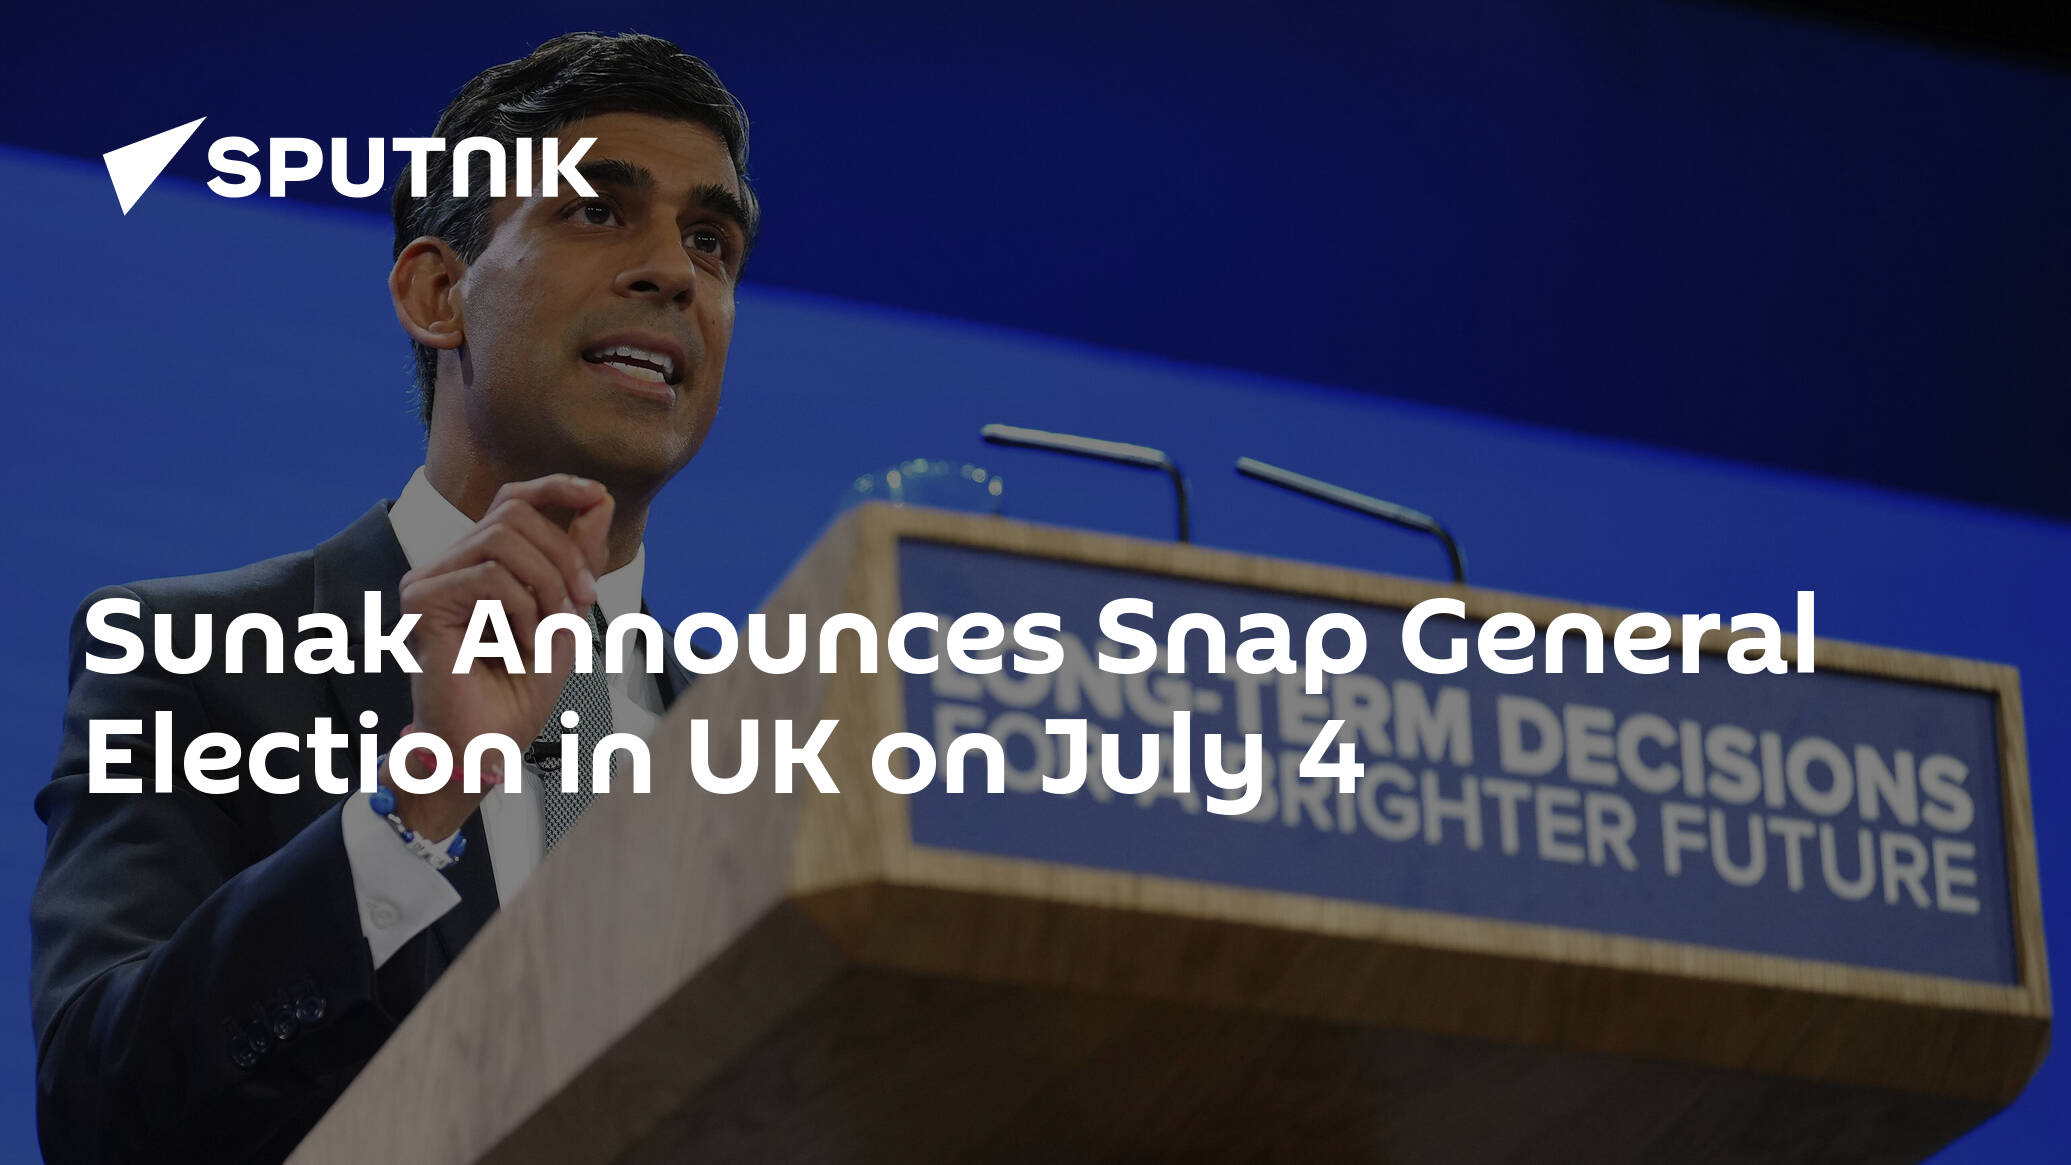 Sunak Announces Snap General Election in UK on July 4